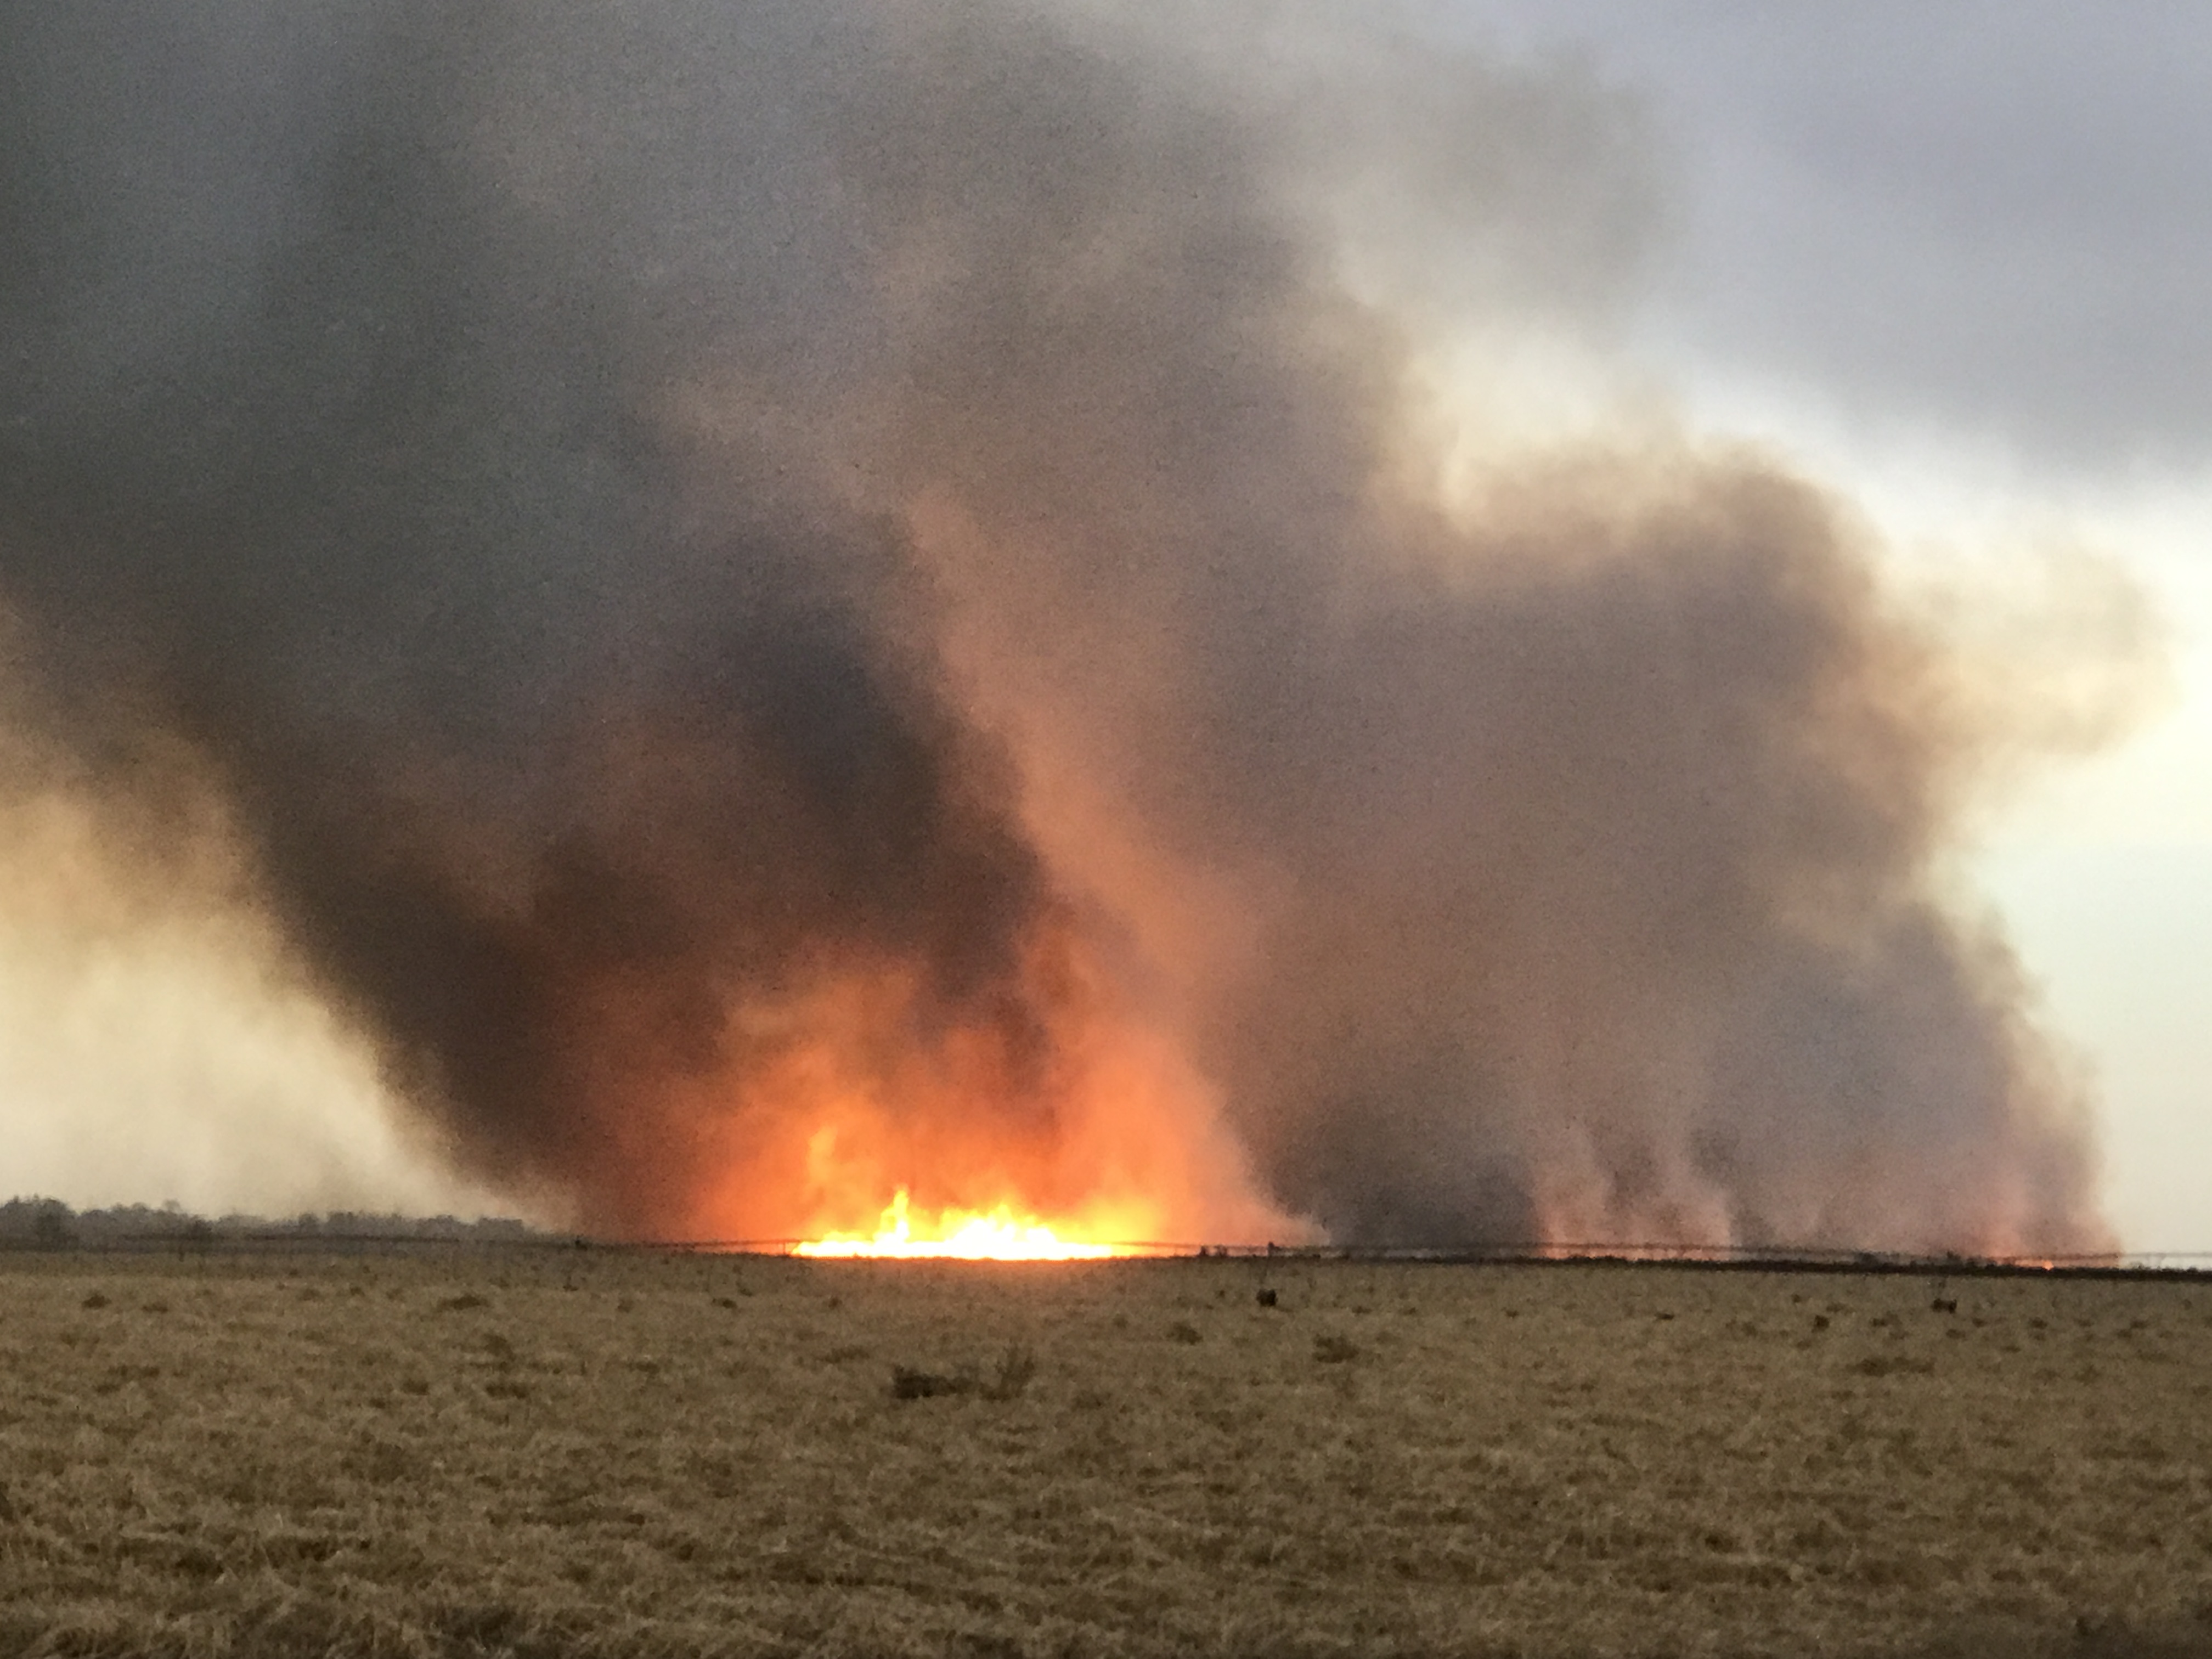 Fire near Sudan on Sunday evening (29 April 2018). The picture is courtesy of Bruce Haynie.